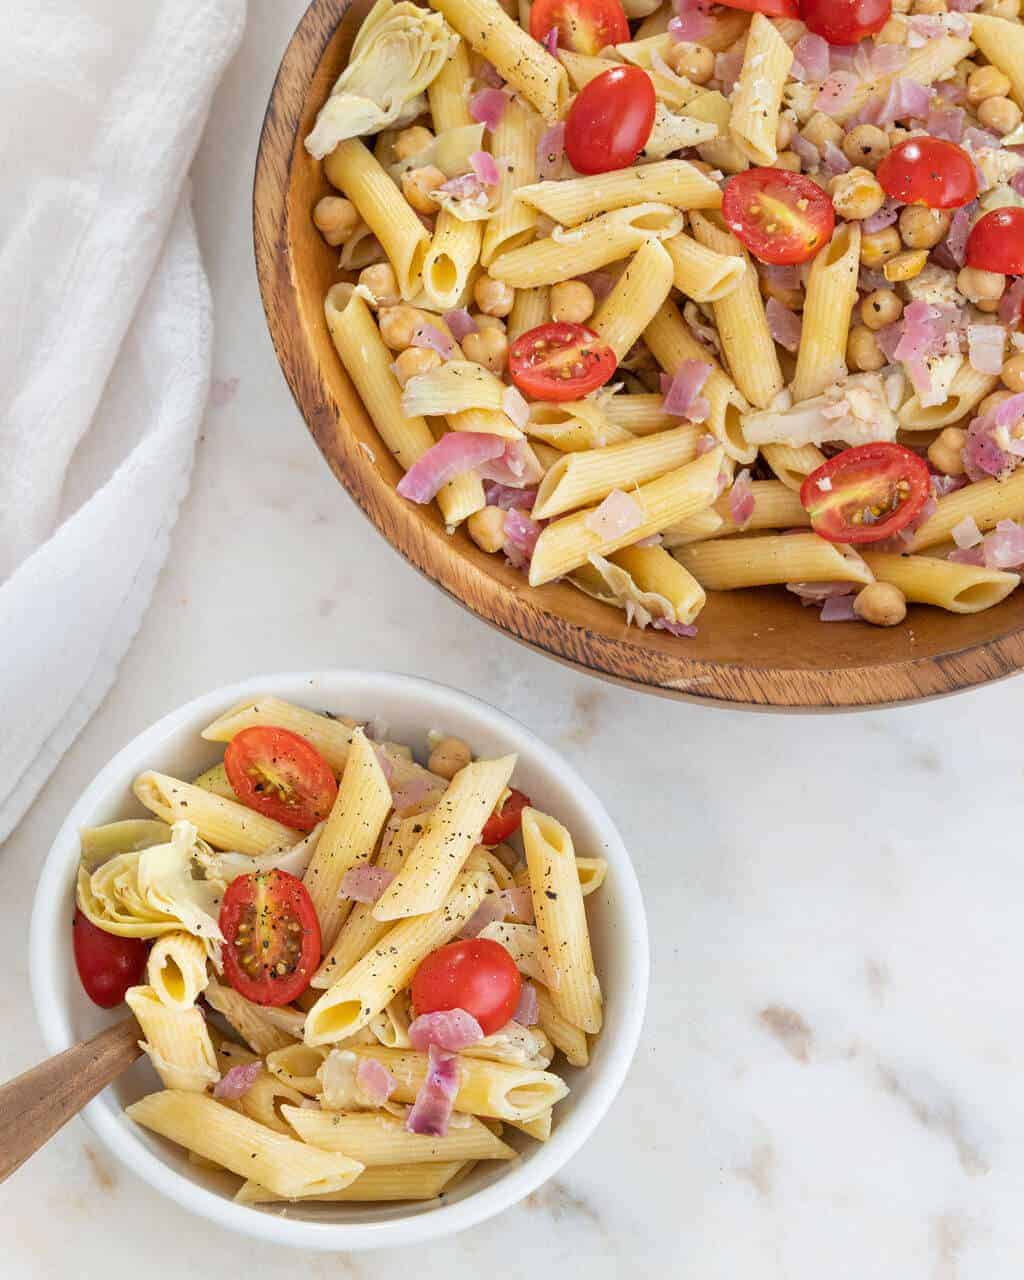 Summer penne and tomato pasta salad in a small bowl next to a full wood serving bowl.